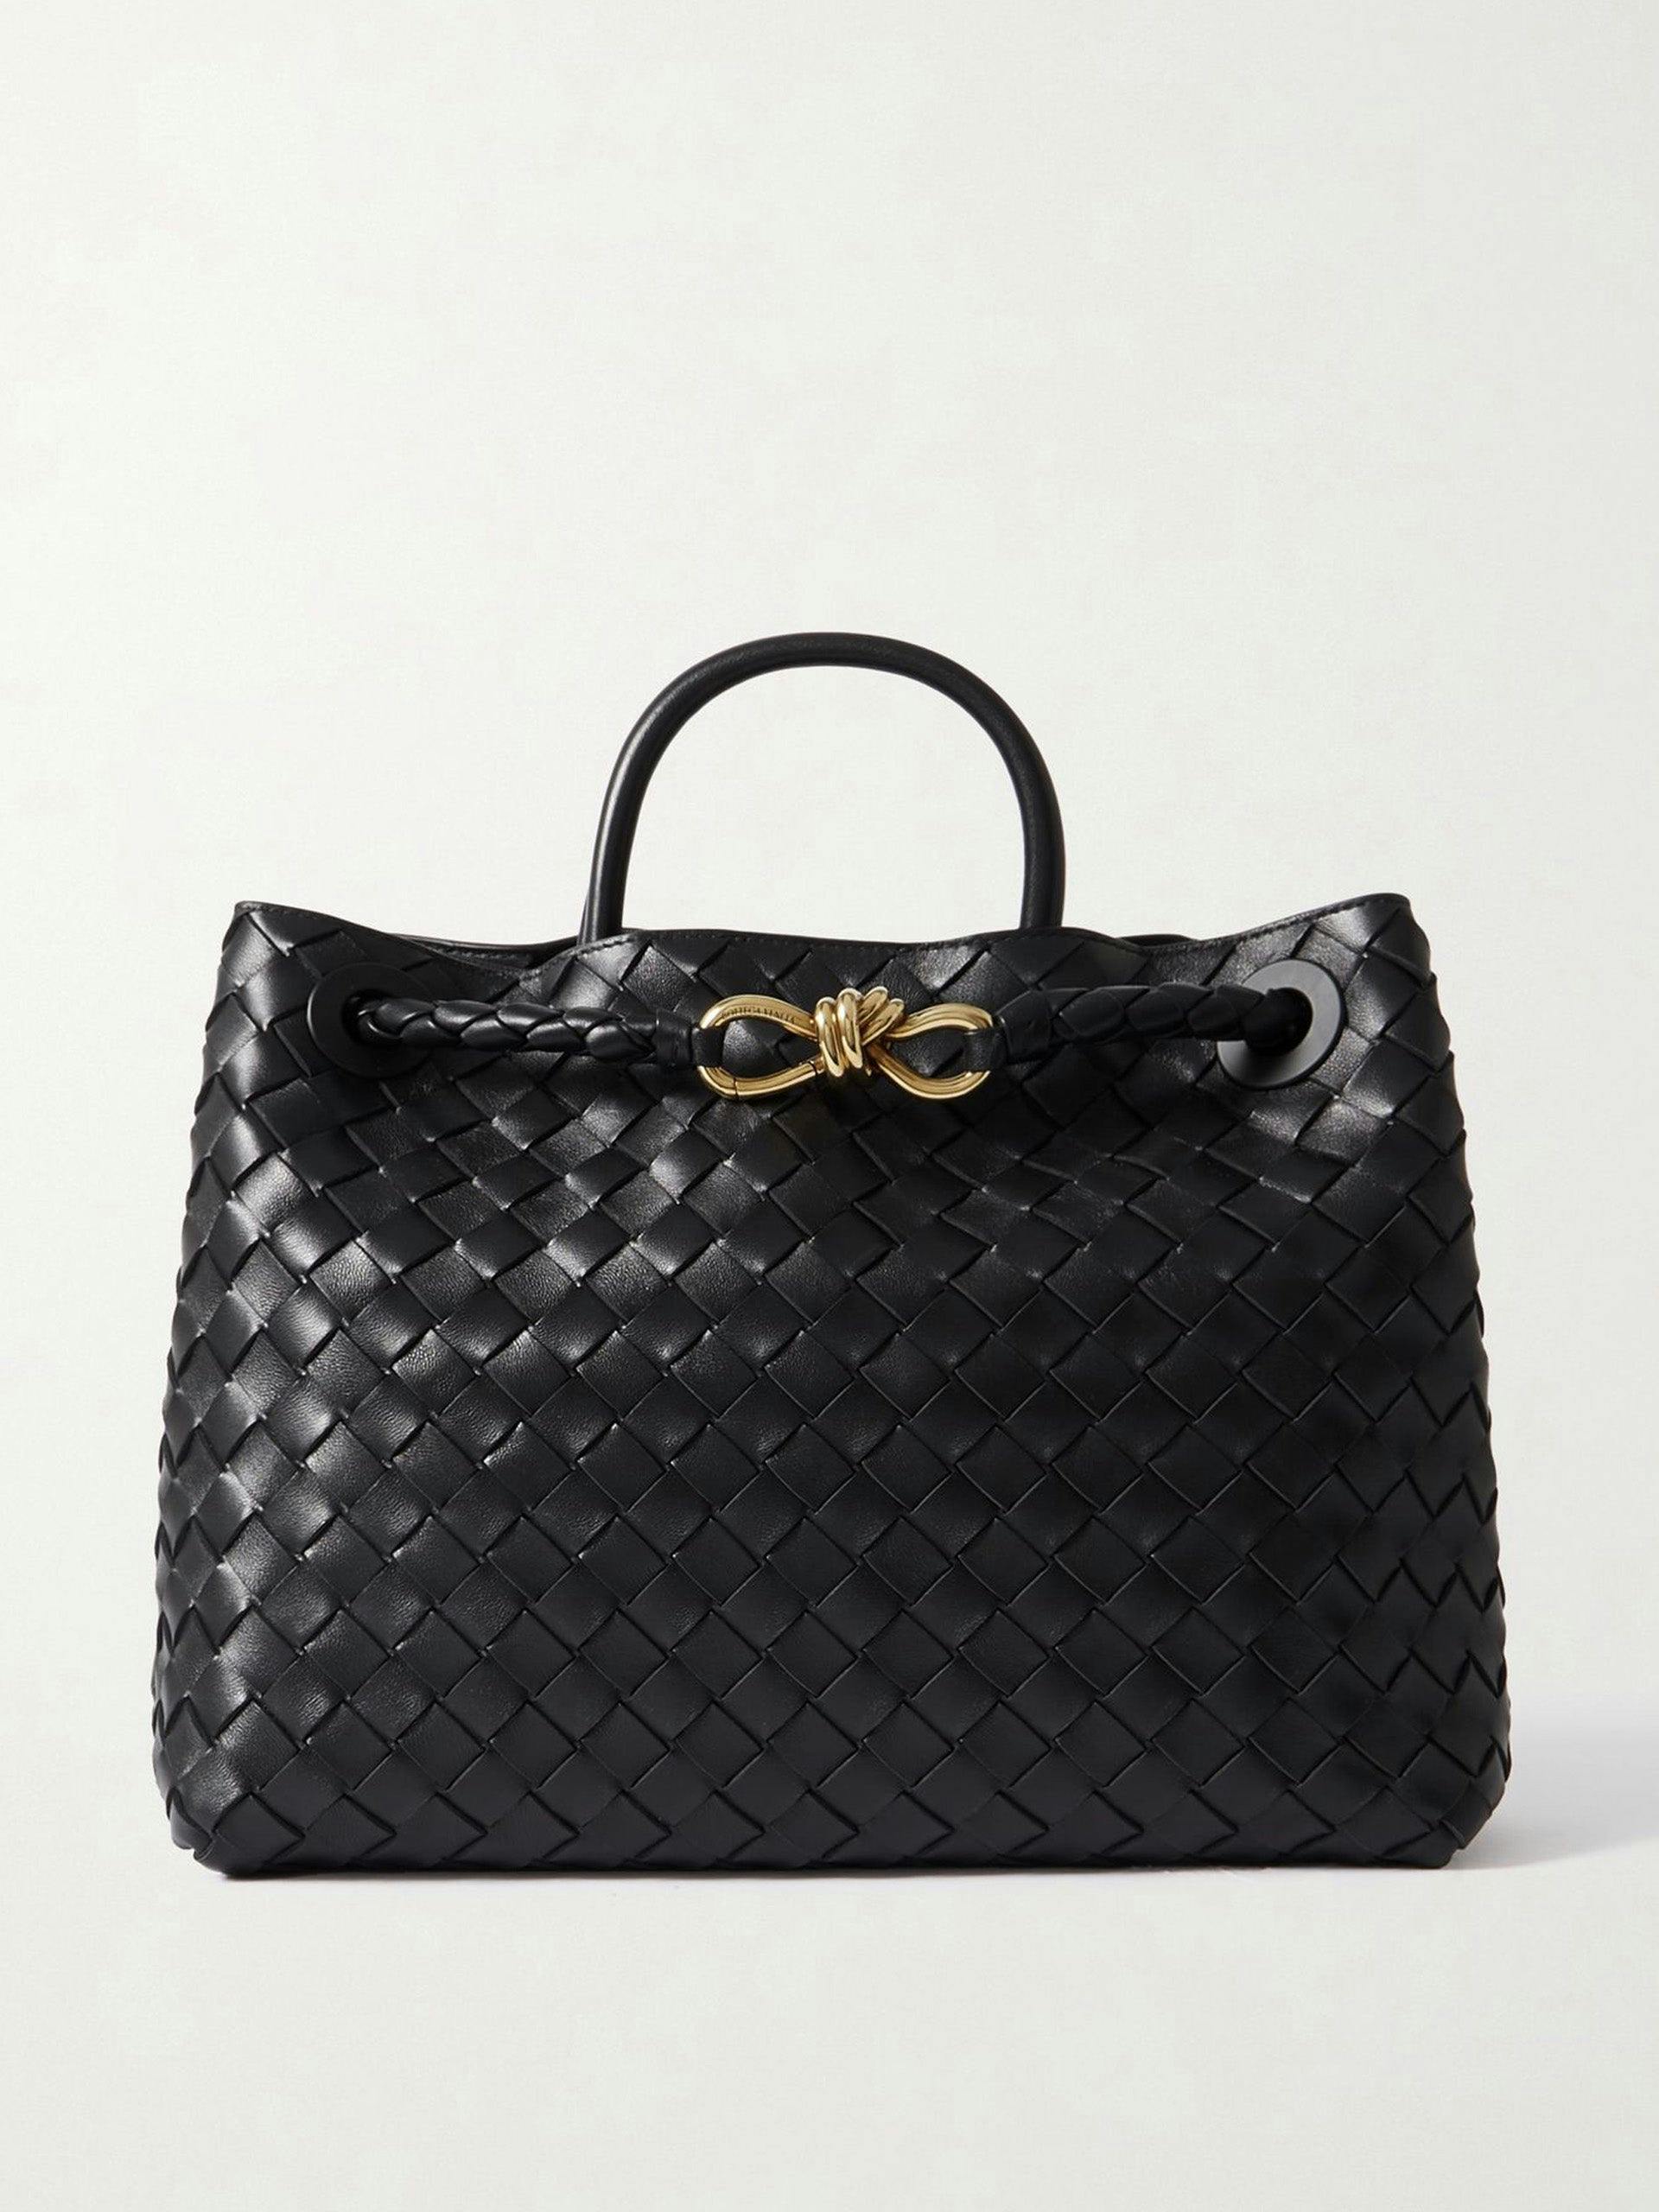 Black small leather tote